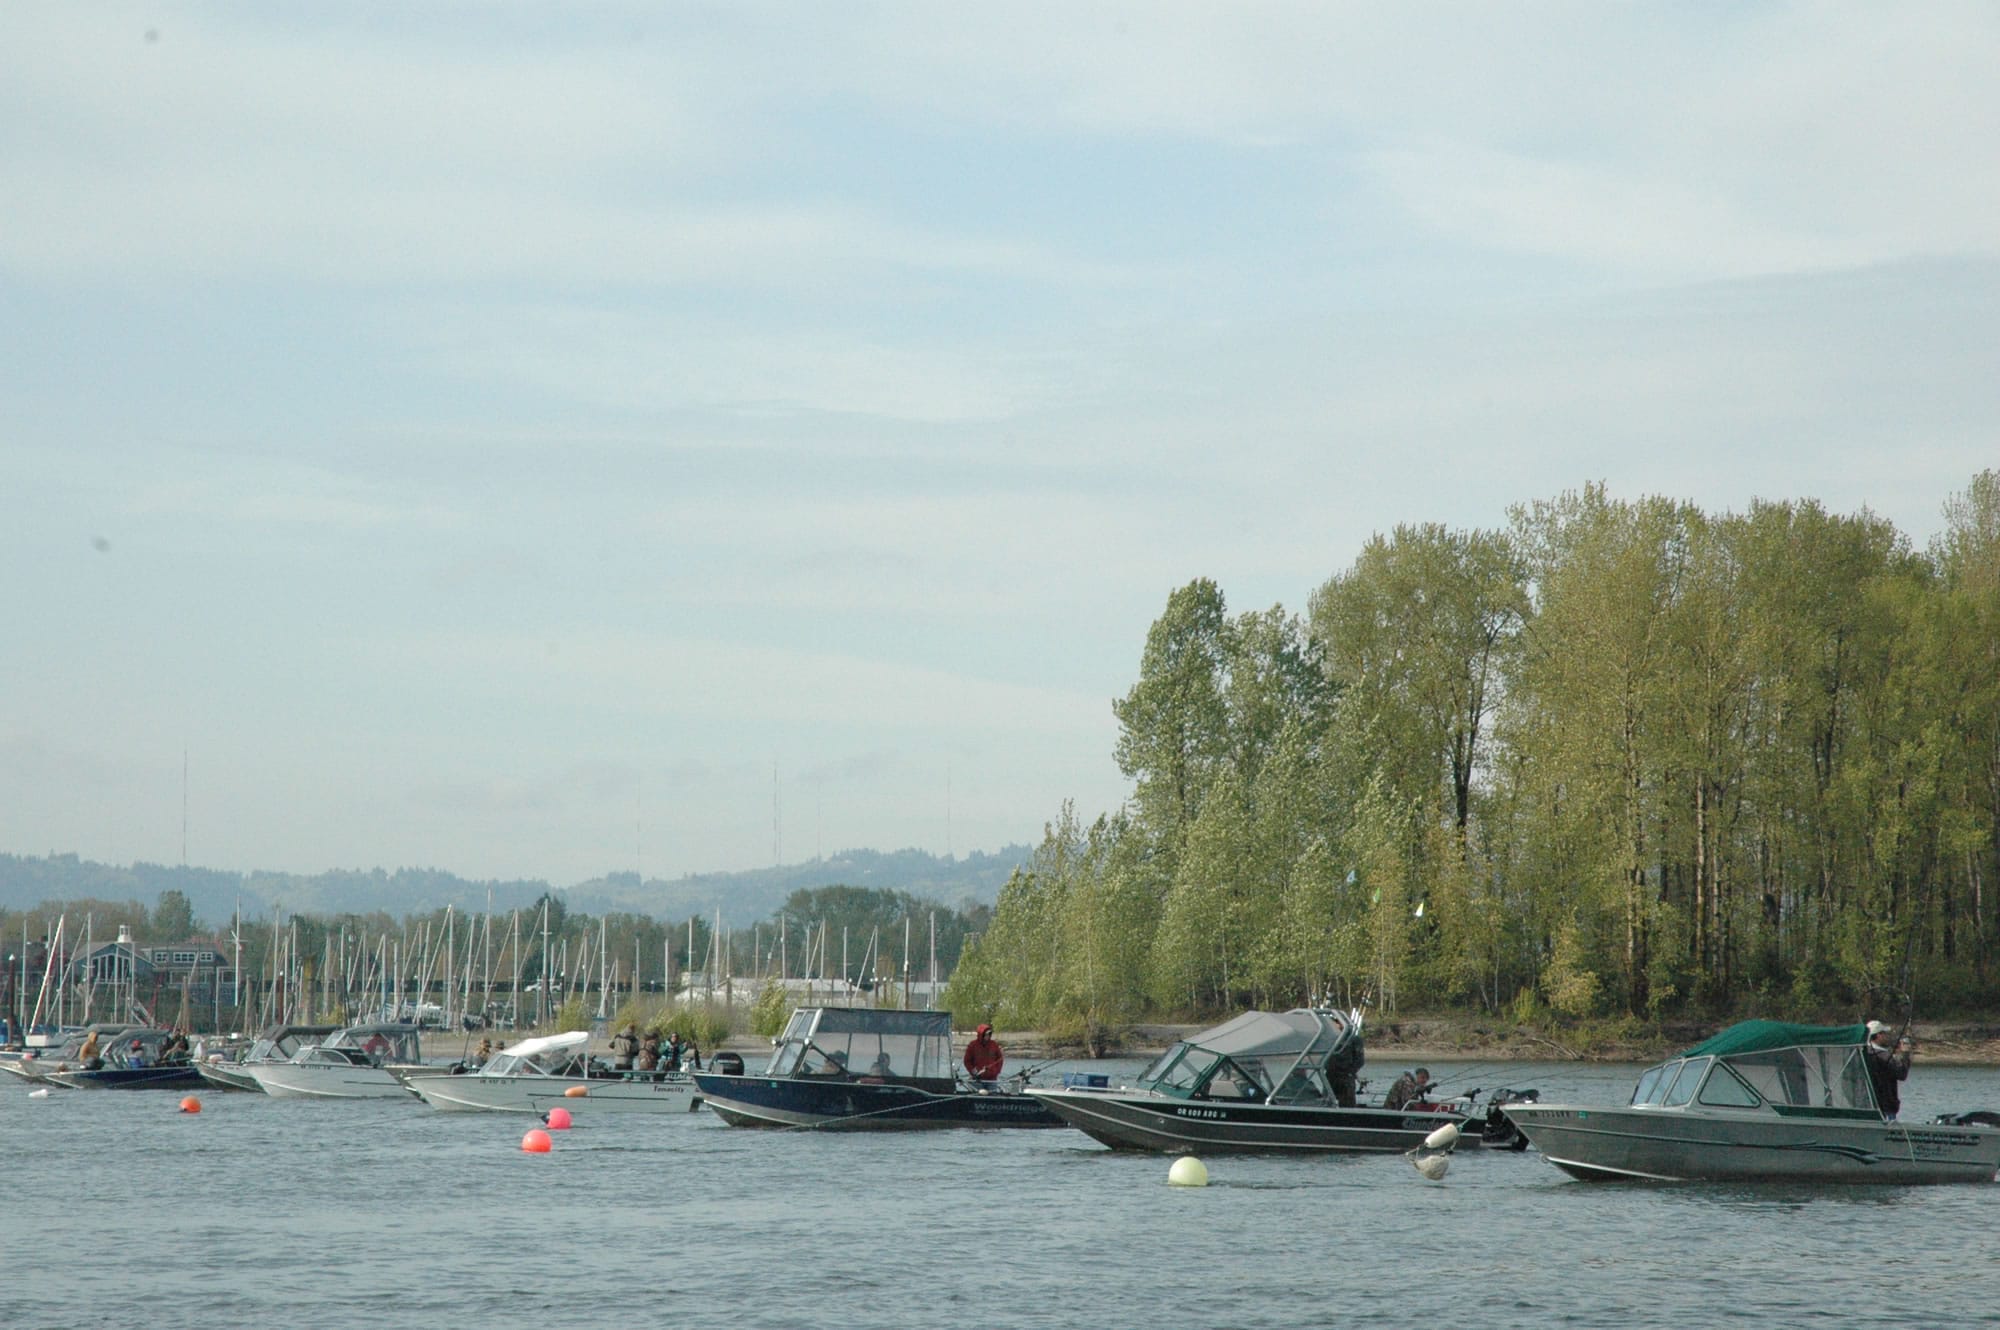 Spring chinook fishing upstream of Interstate 5 will open on March 1 and is projected to continue through April 6.